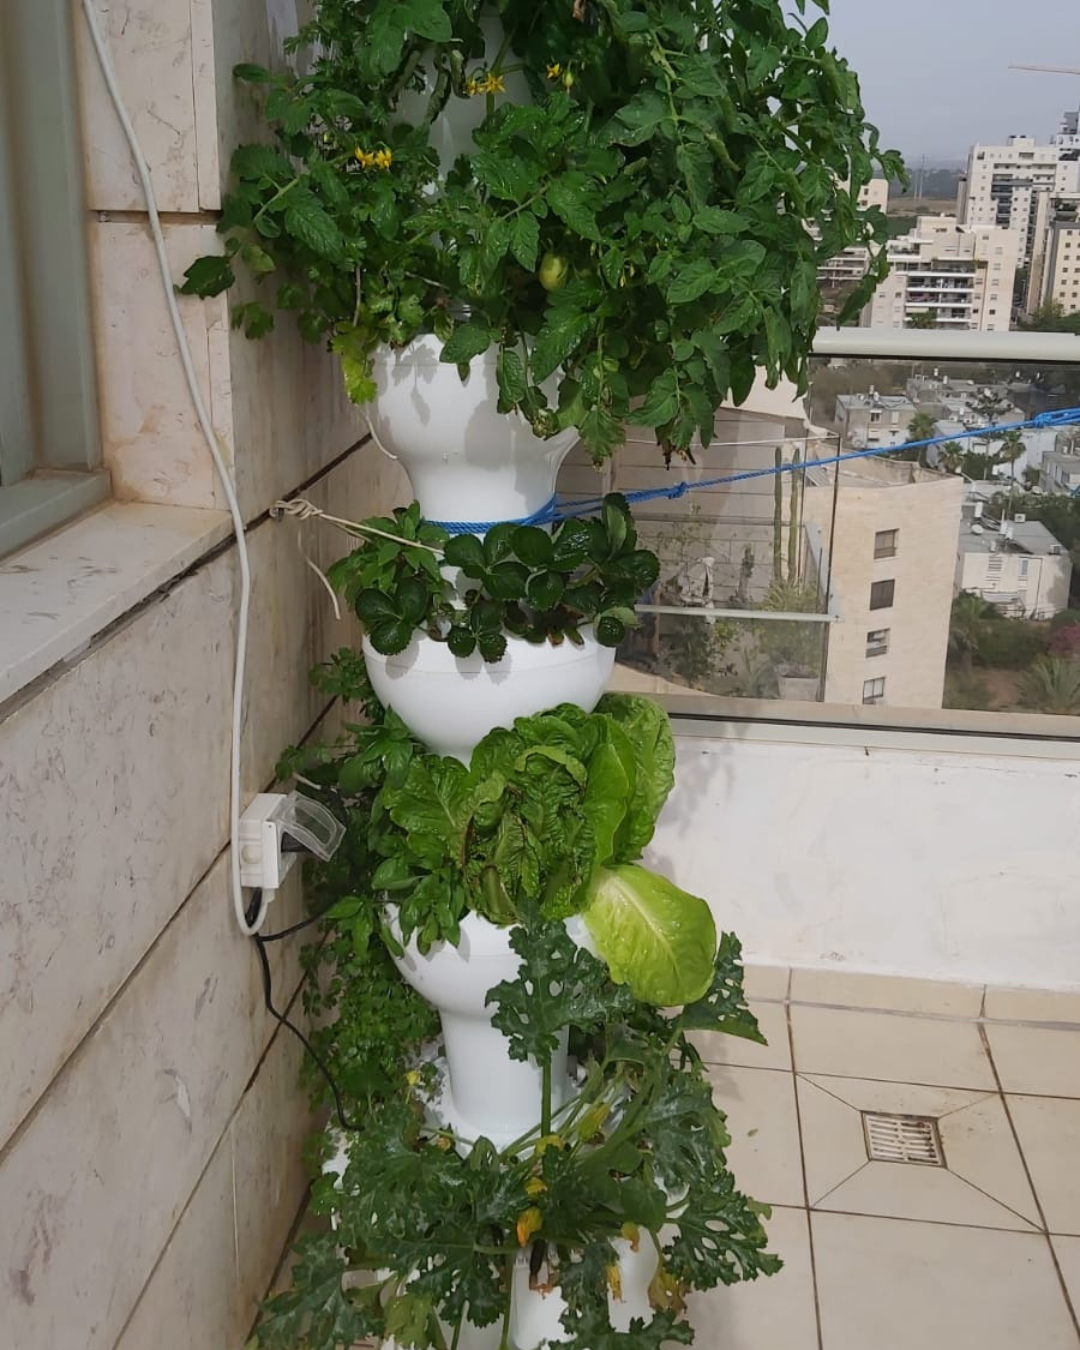 Airponic Fruit - Hydroponic Tower Garden System